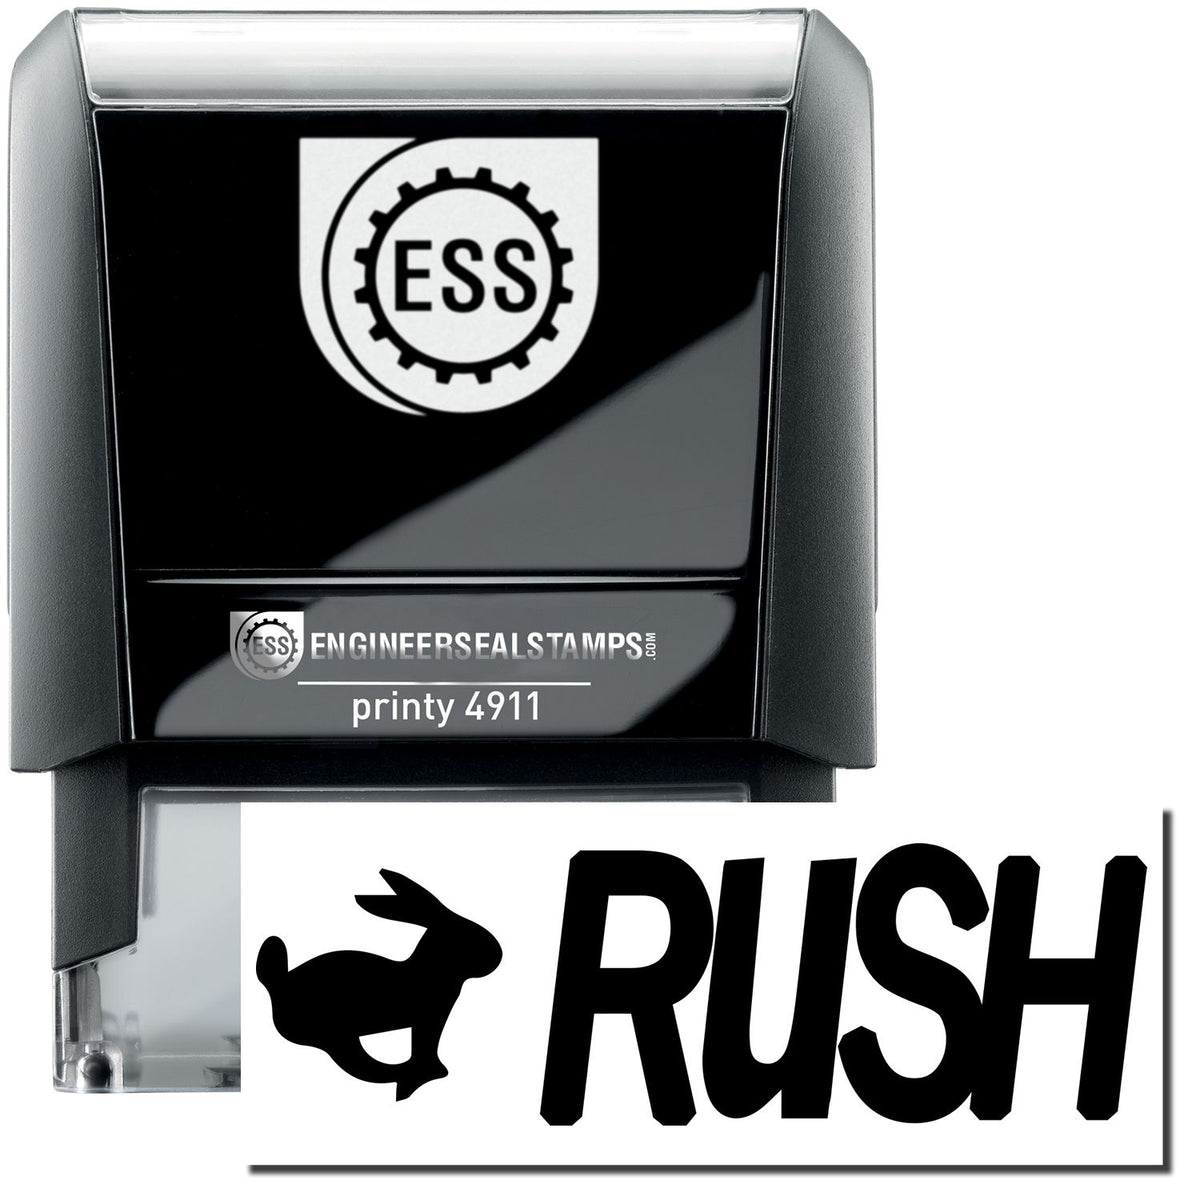 A self-inking stamp with a stamped image showing how the text &quot;RUSH&quot; in bold font and an image of a rabbit on the left is displayed after stamping.